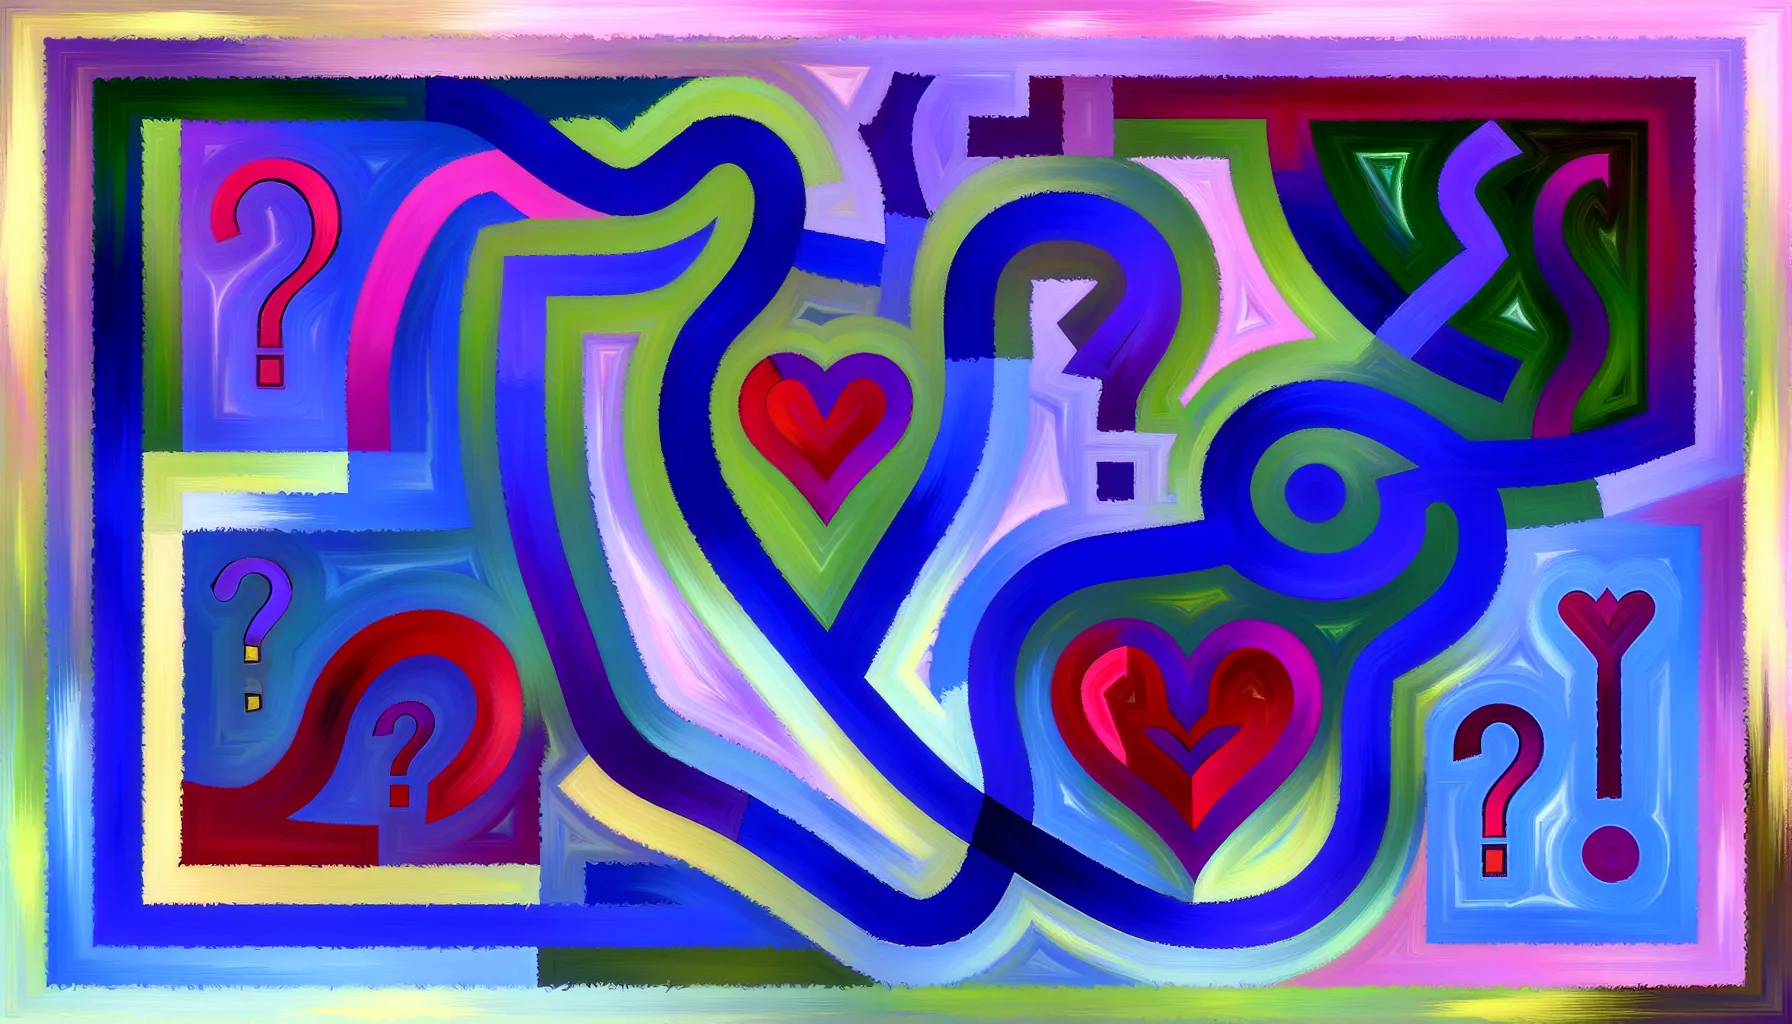 Colorful relationship maze with hearts, question marks, and keys